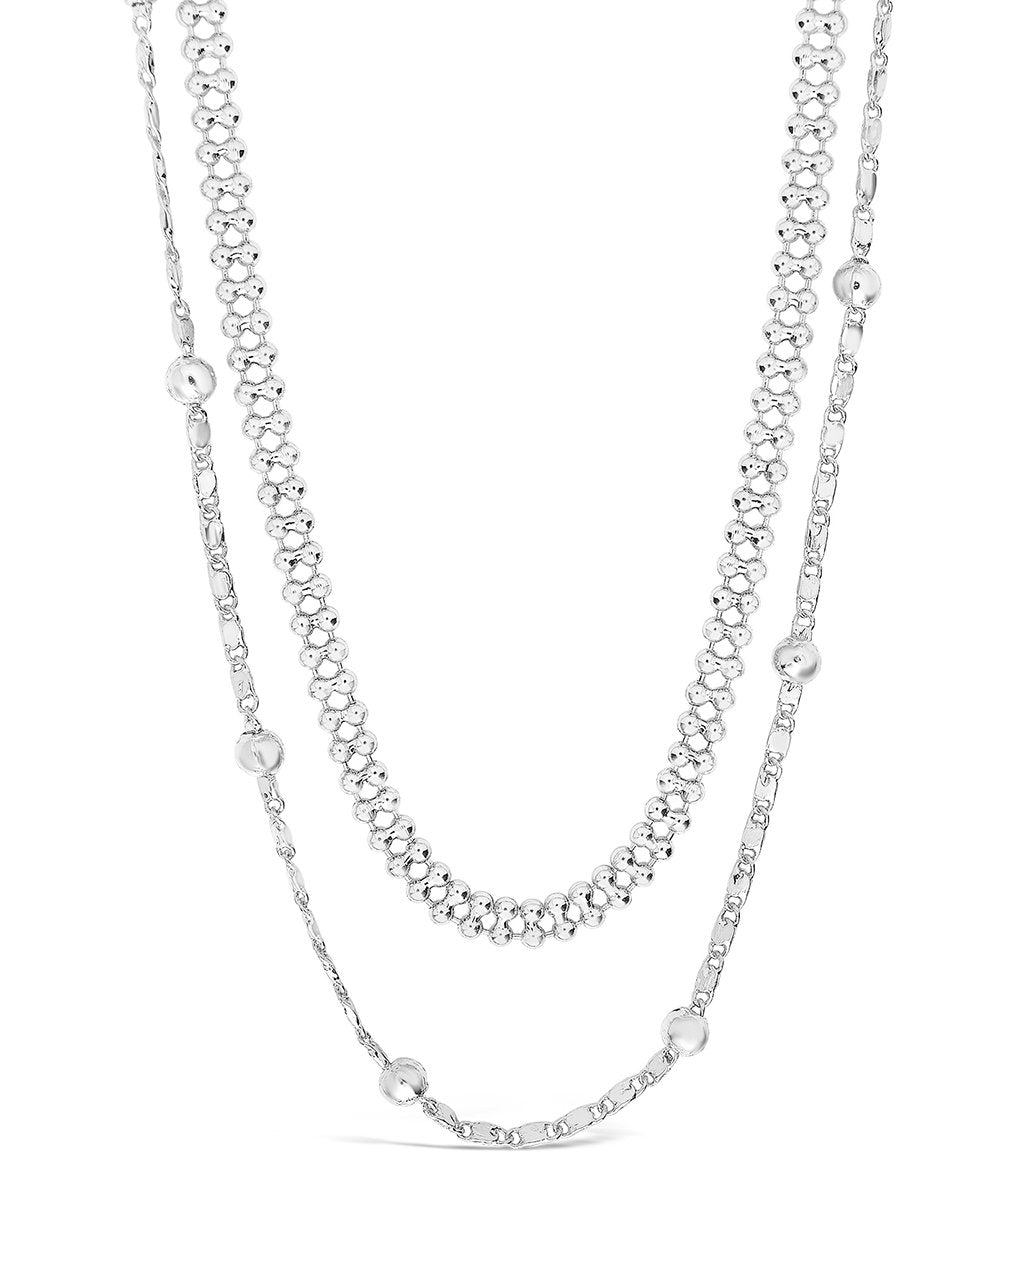 Layered Beaded Chain Necklace Necklace Sterling Forever Silver 